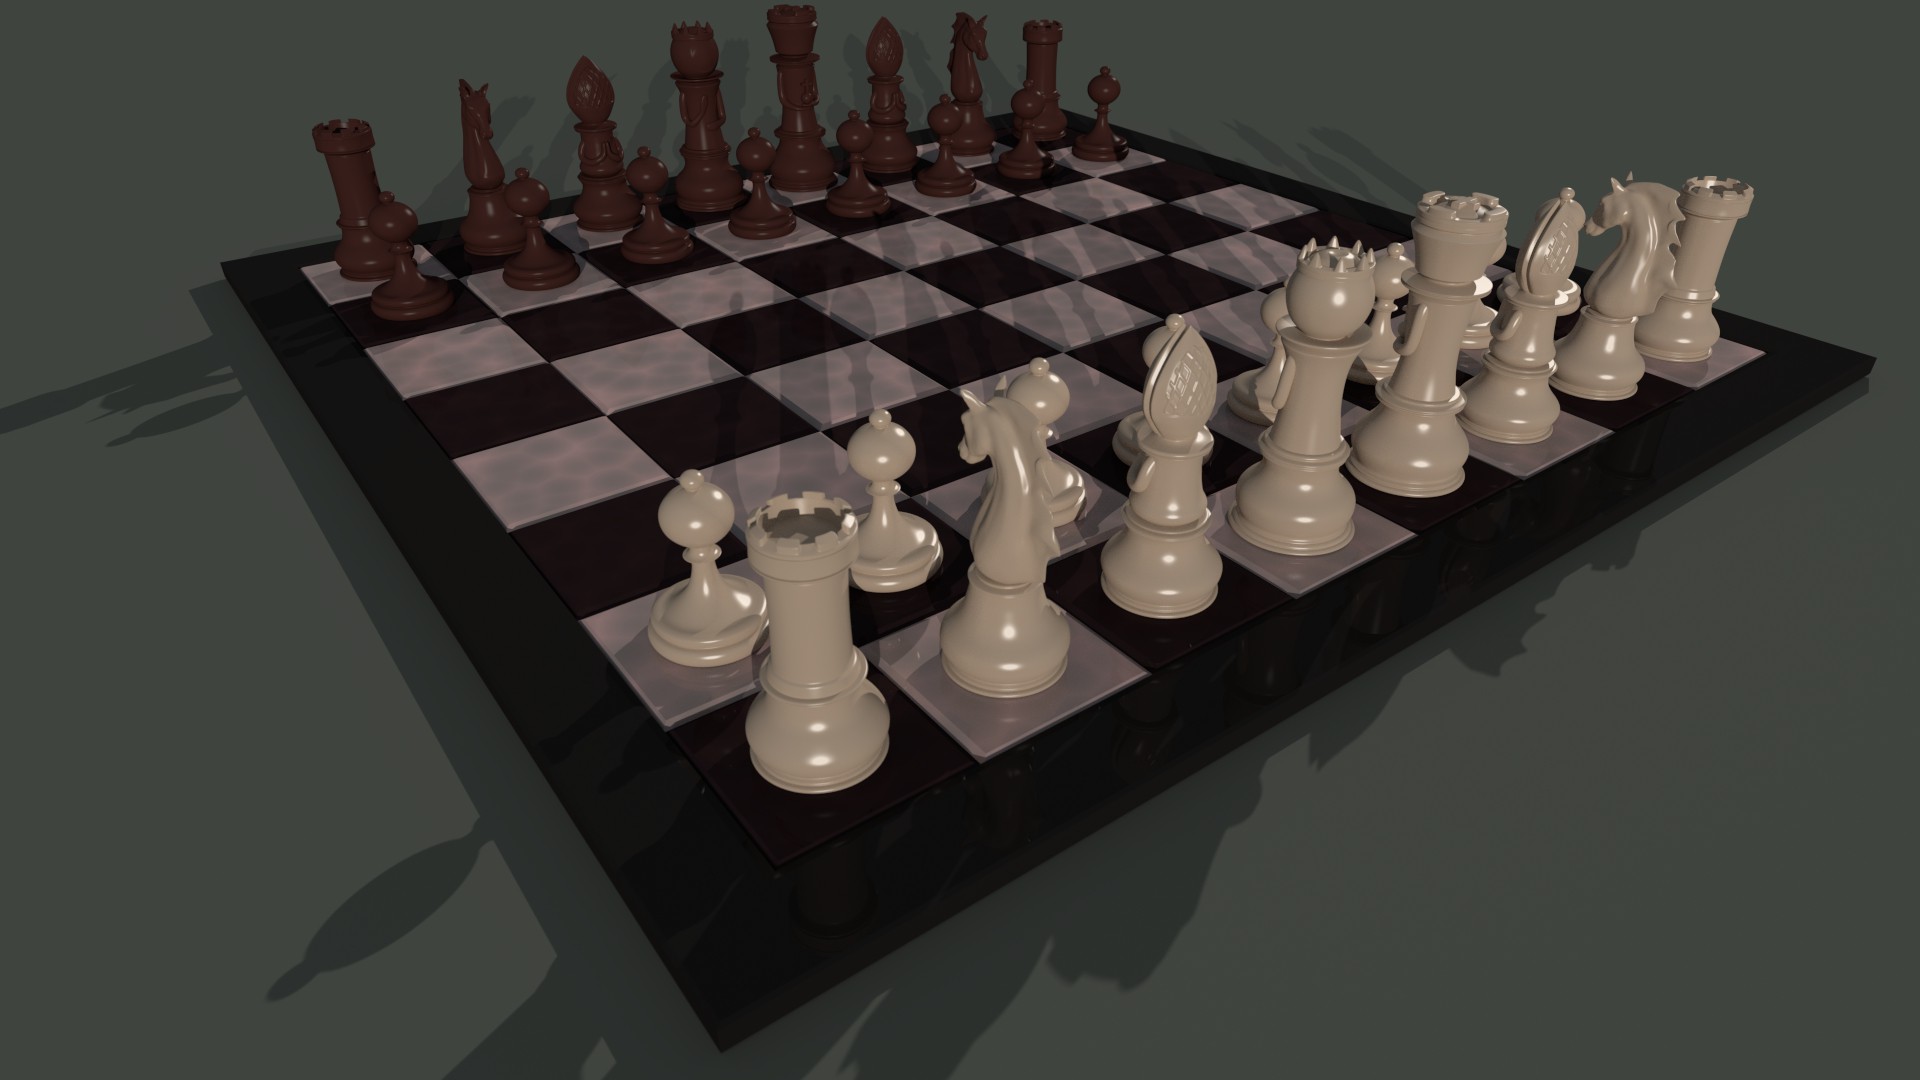 Download wallpapers 3d chess, chess pieces, 3d objects, chess concepts for  desktop free. Pictures for desktop free